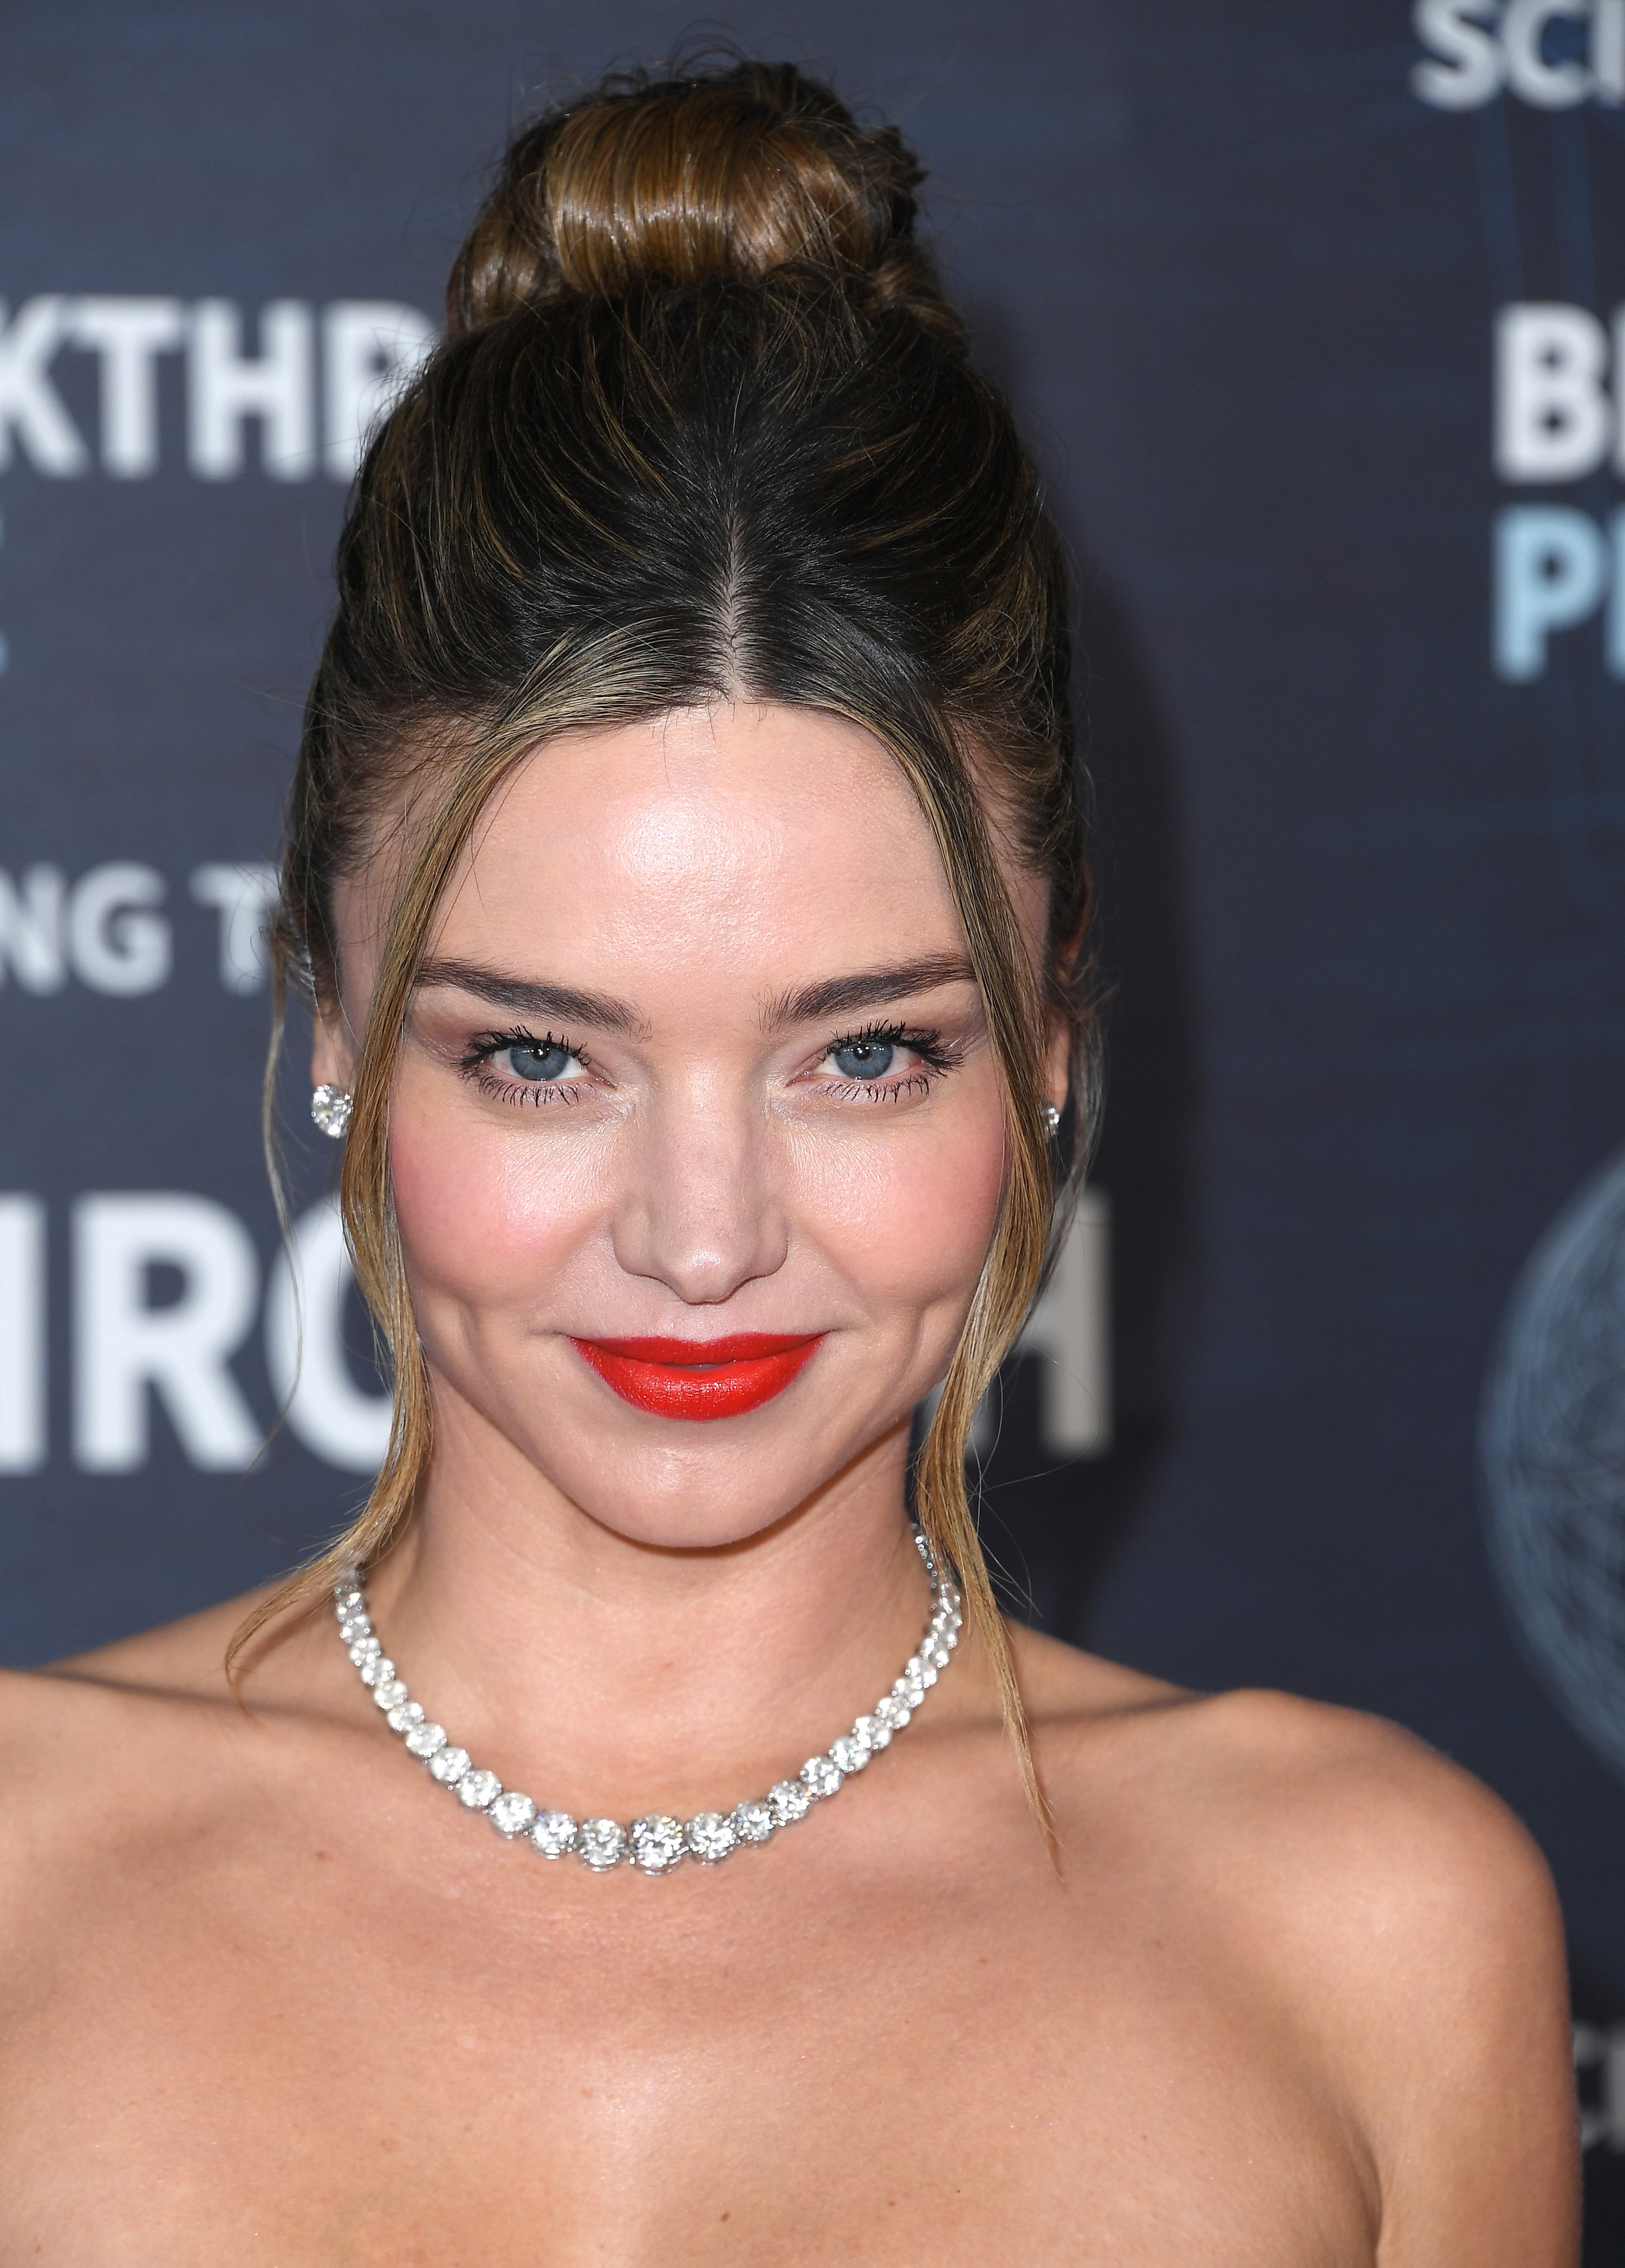 A close-up shot of Miranda Kerr on the red carpet in a strapless gown with a diamond necklace and bright red lips